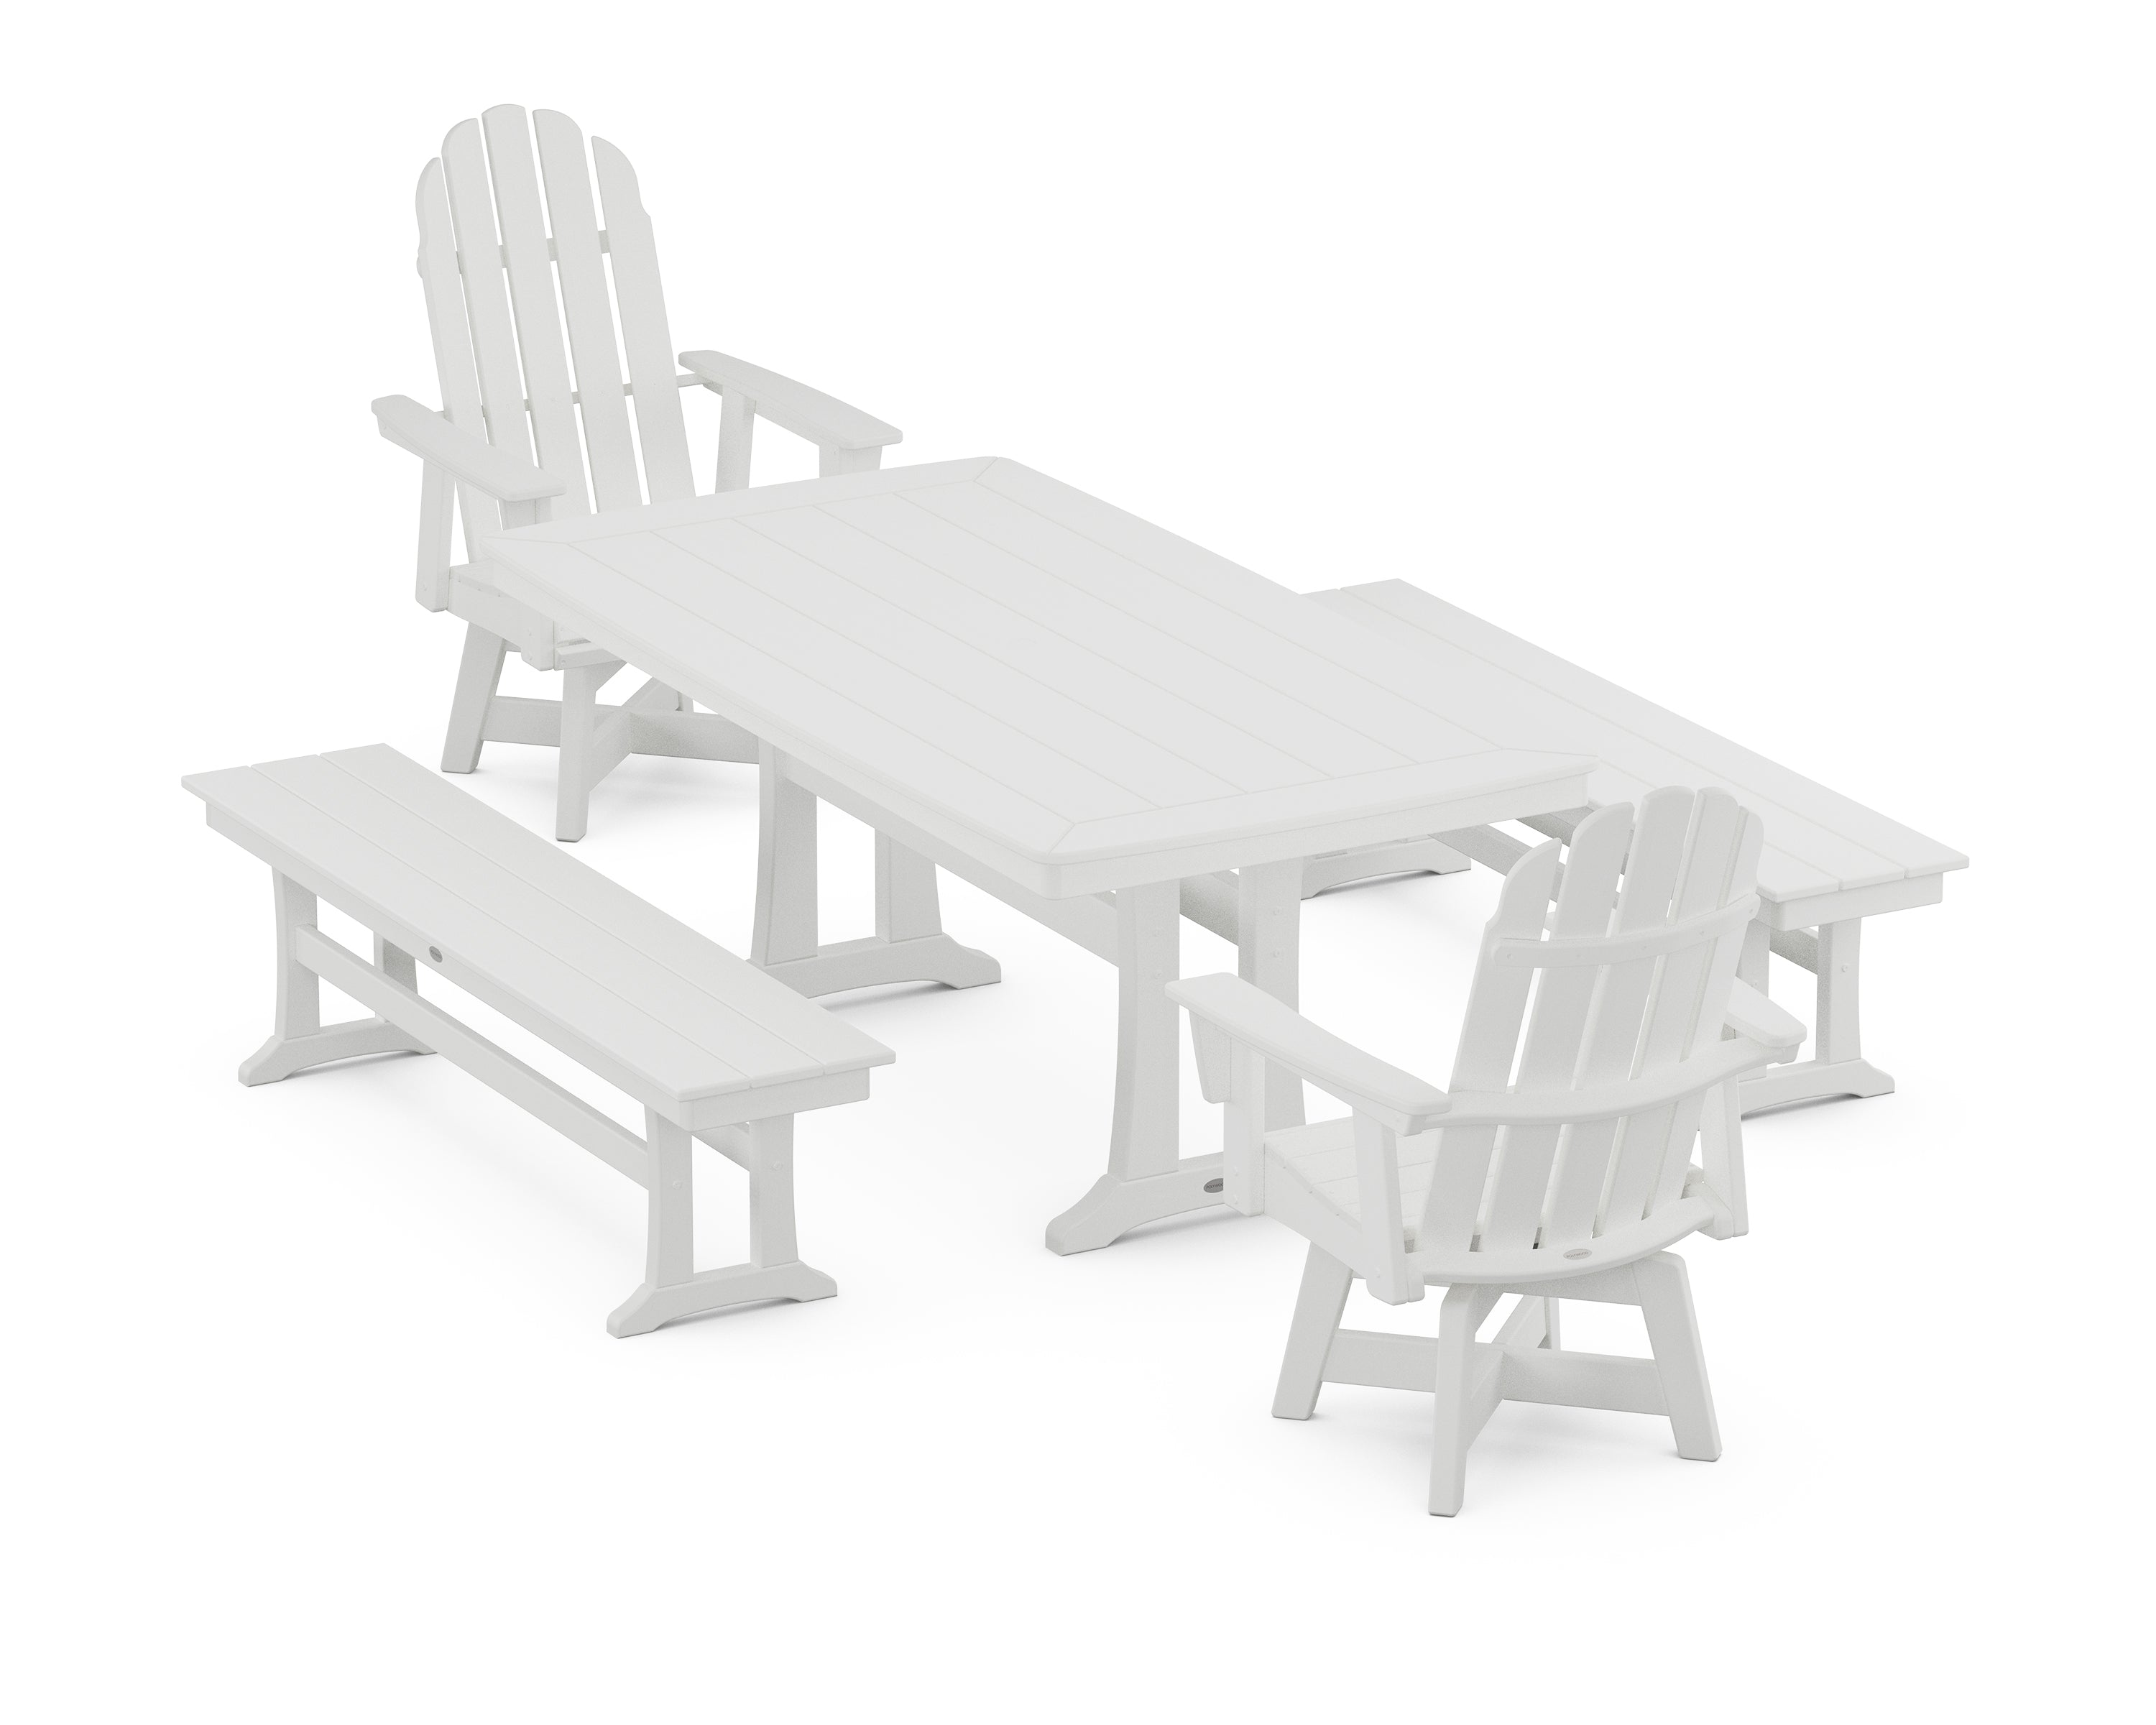 POLYWOOD® Vineyard Adirondack Swivel Chair 5-Piece Dining Set with Trestle Legs and Benches in White